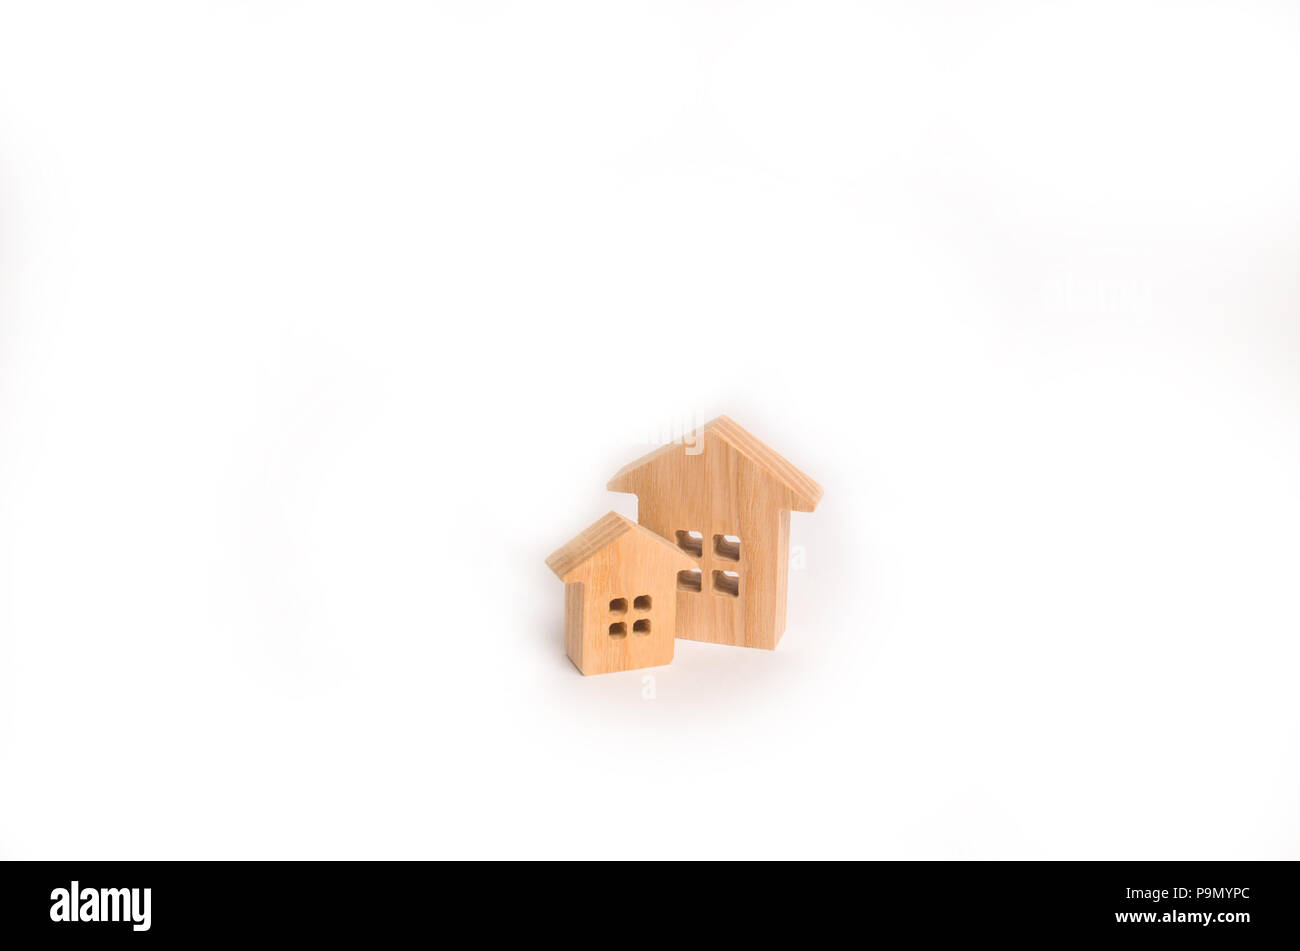 Investments, insurance and construction of housing and business. Two wooden houses on a white background. Concept of real estate, buying and selling.  Stock Photo